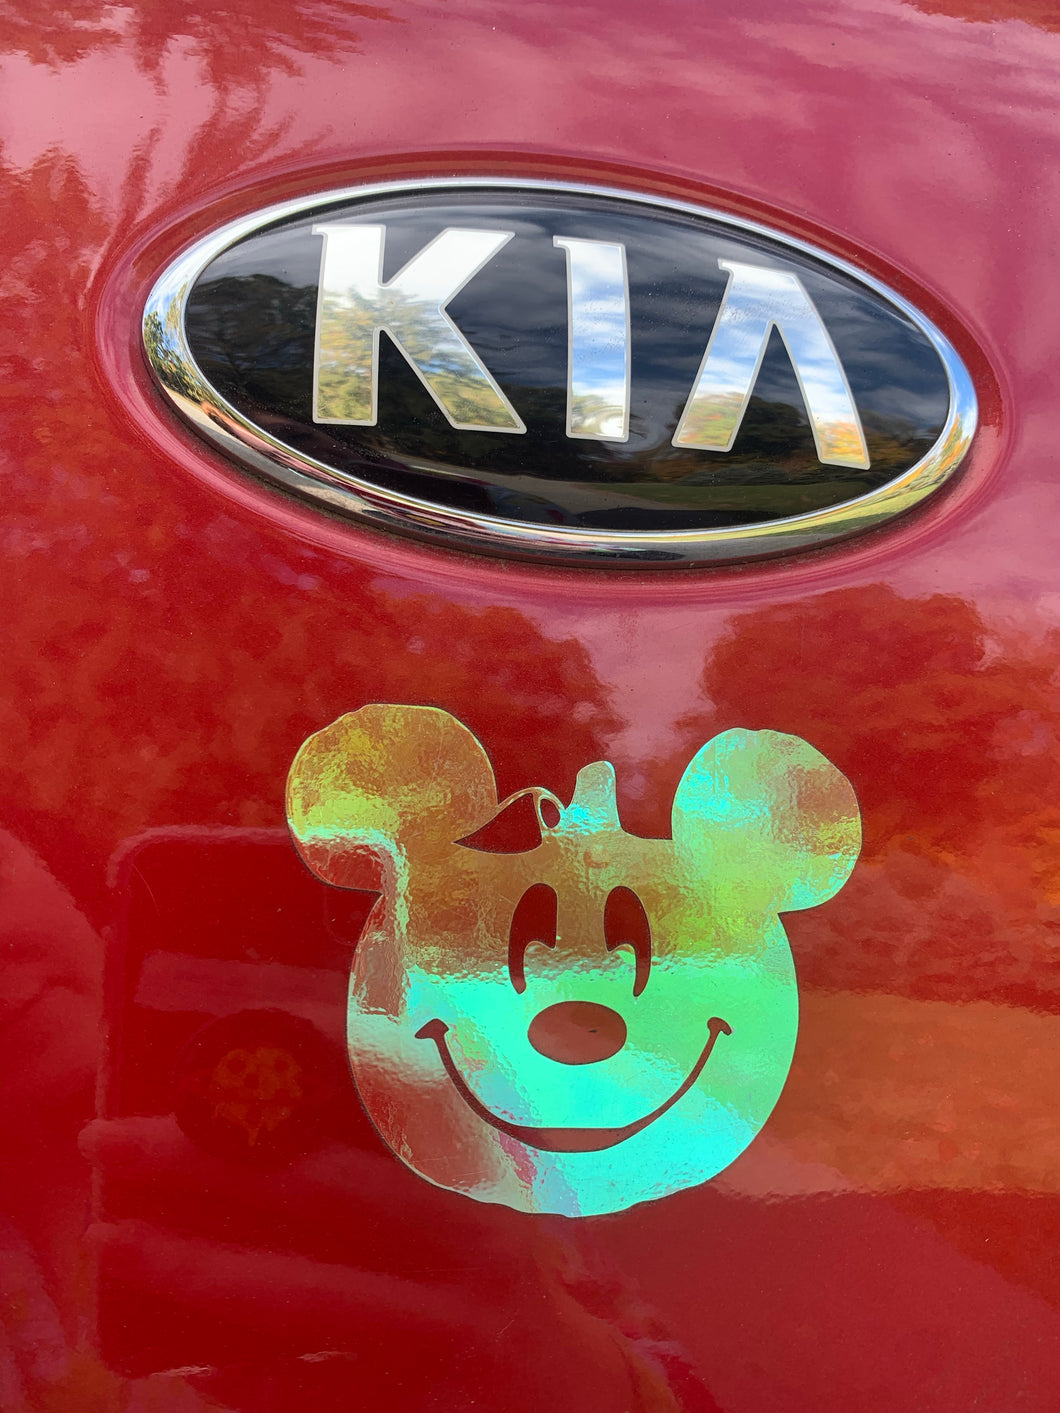 Red Holographic Pumpkin Mouse Inspired Vinyl Decal